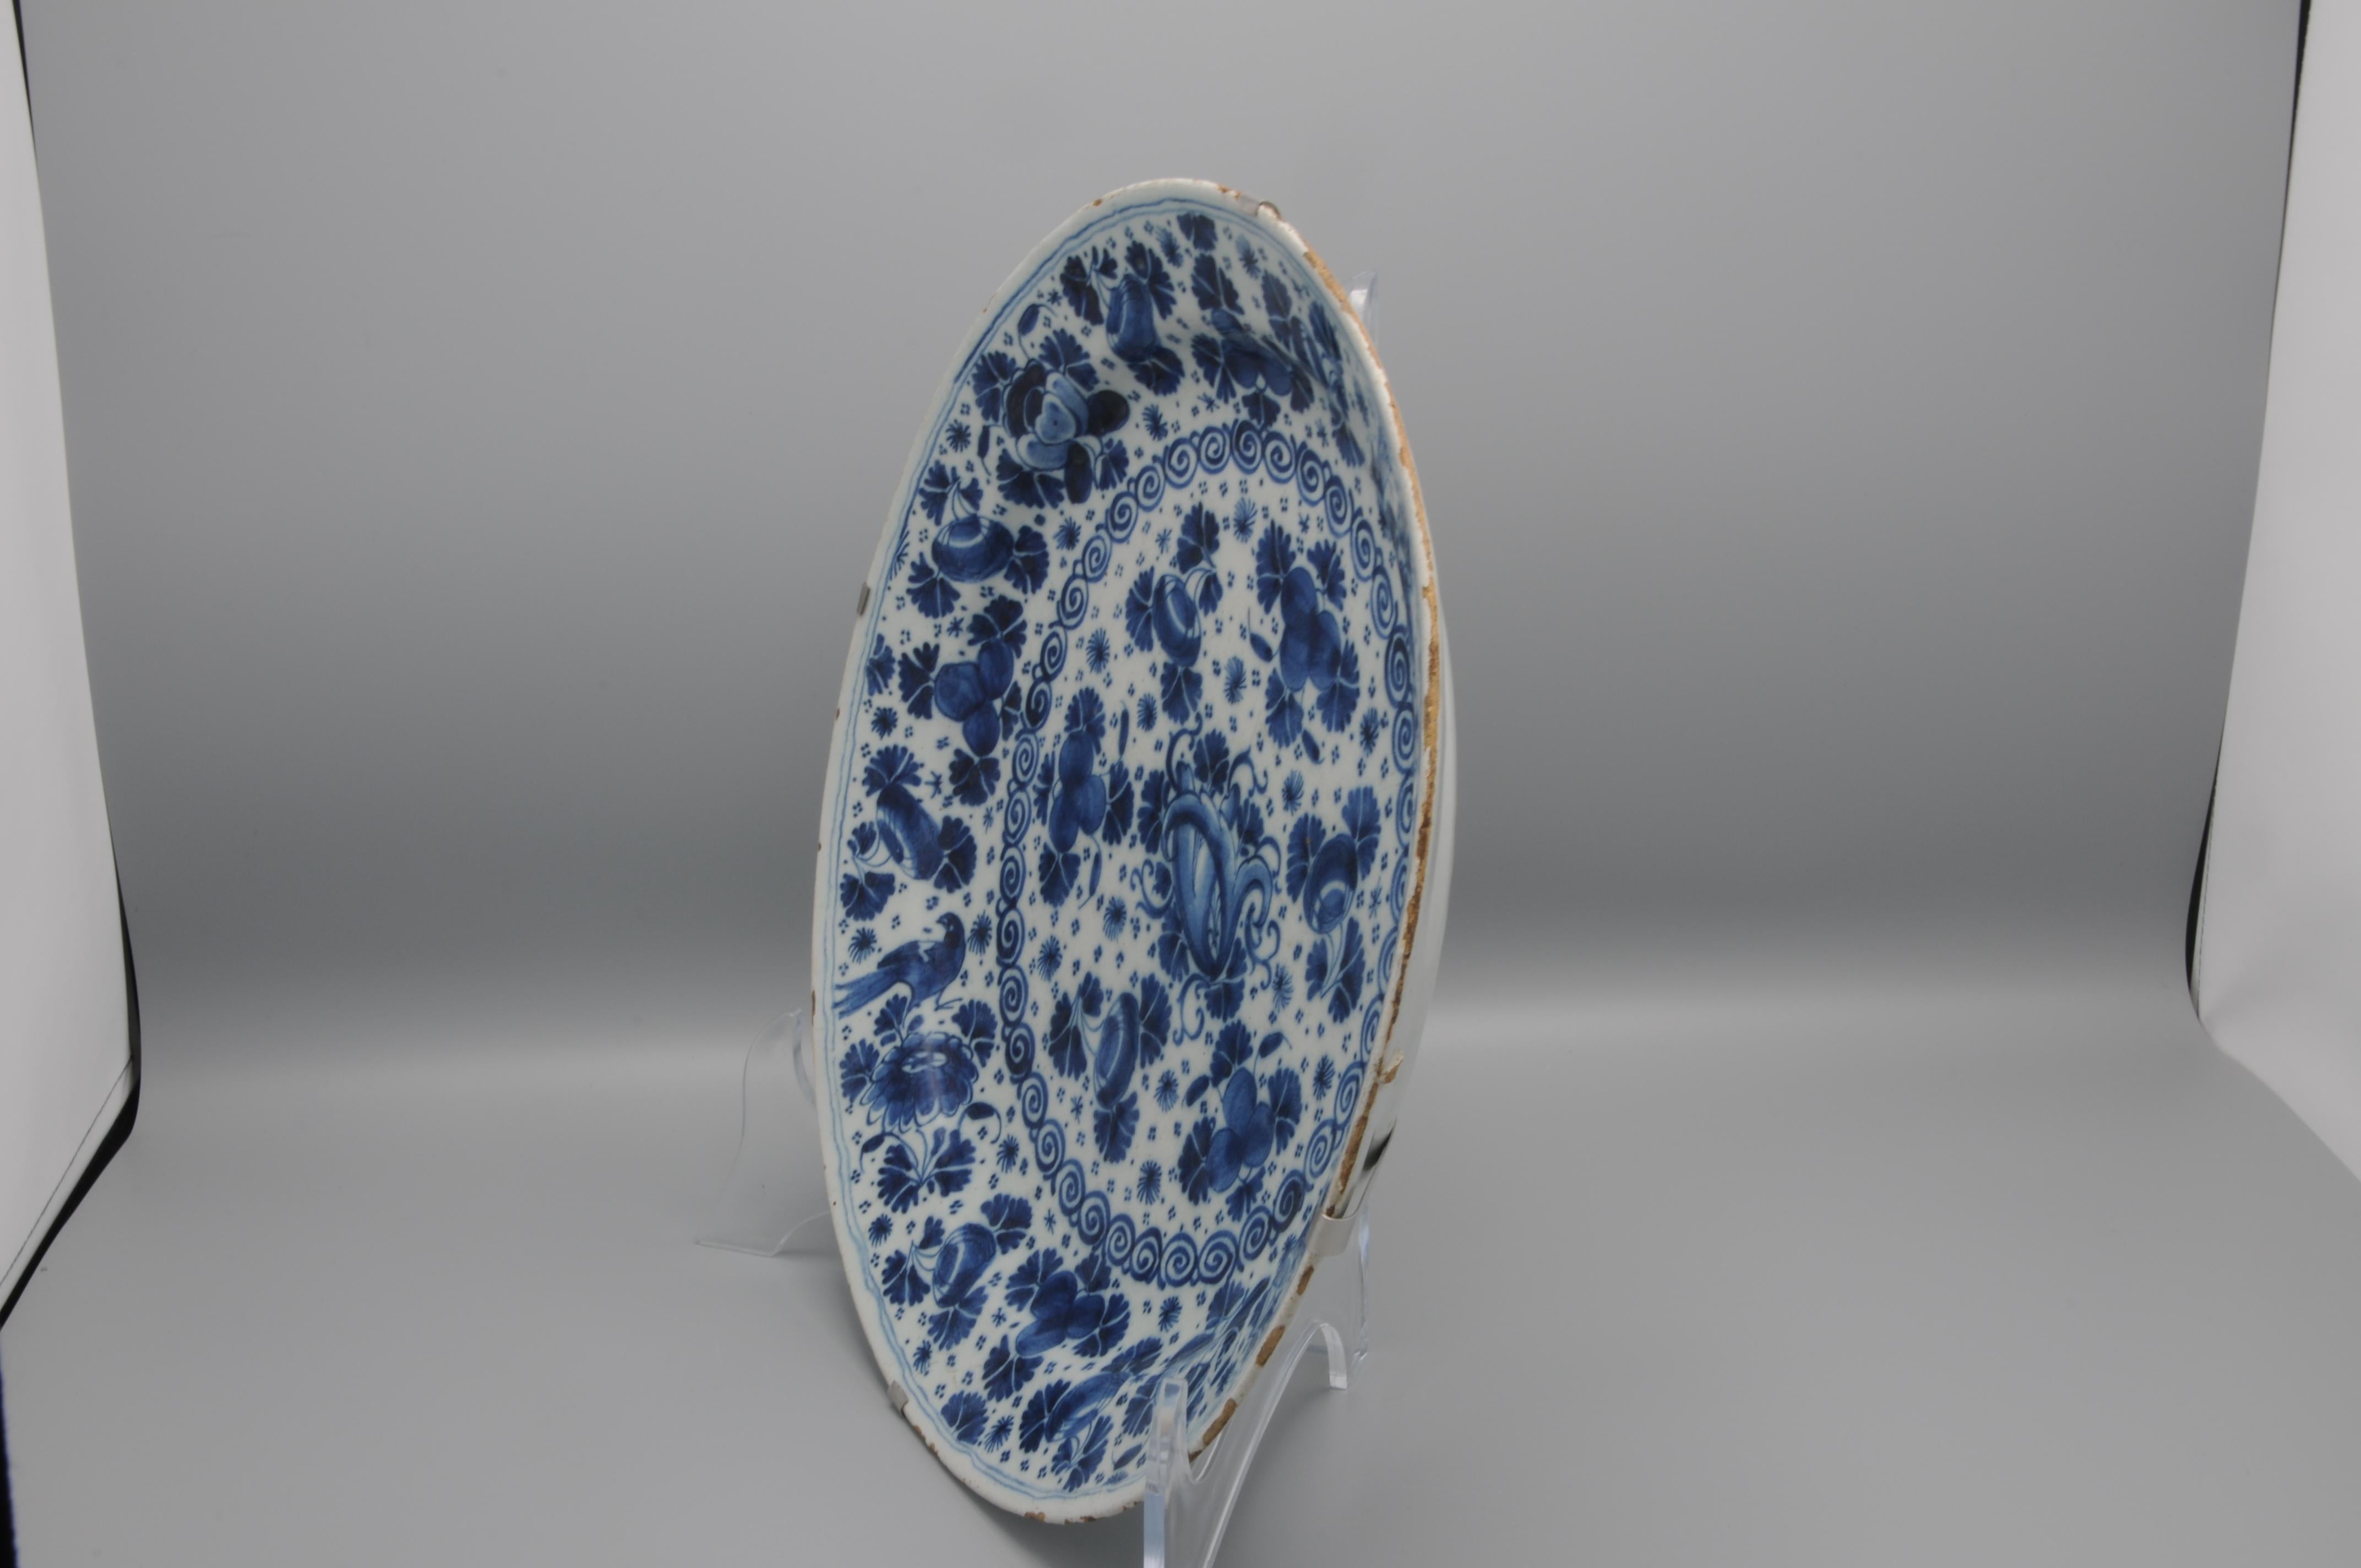 Earthenware Pieter Kam, Delft - Large Charger with 'Parsley / mille fleurs' decor For Sale